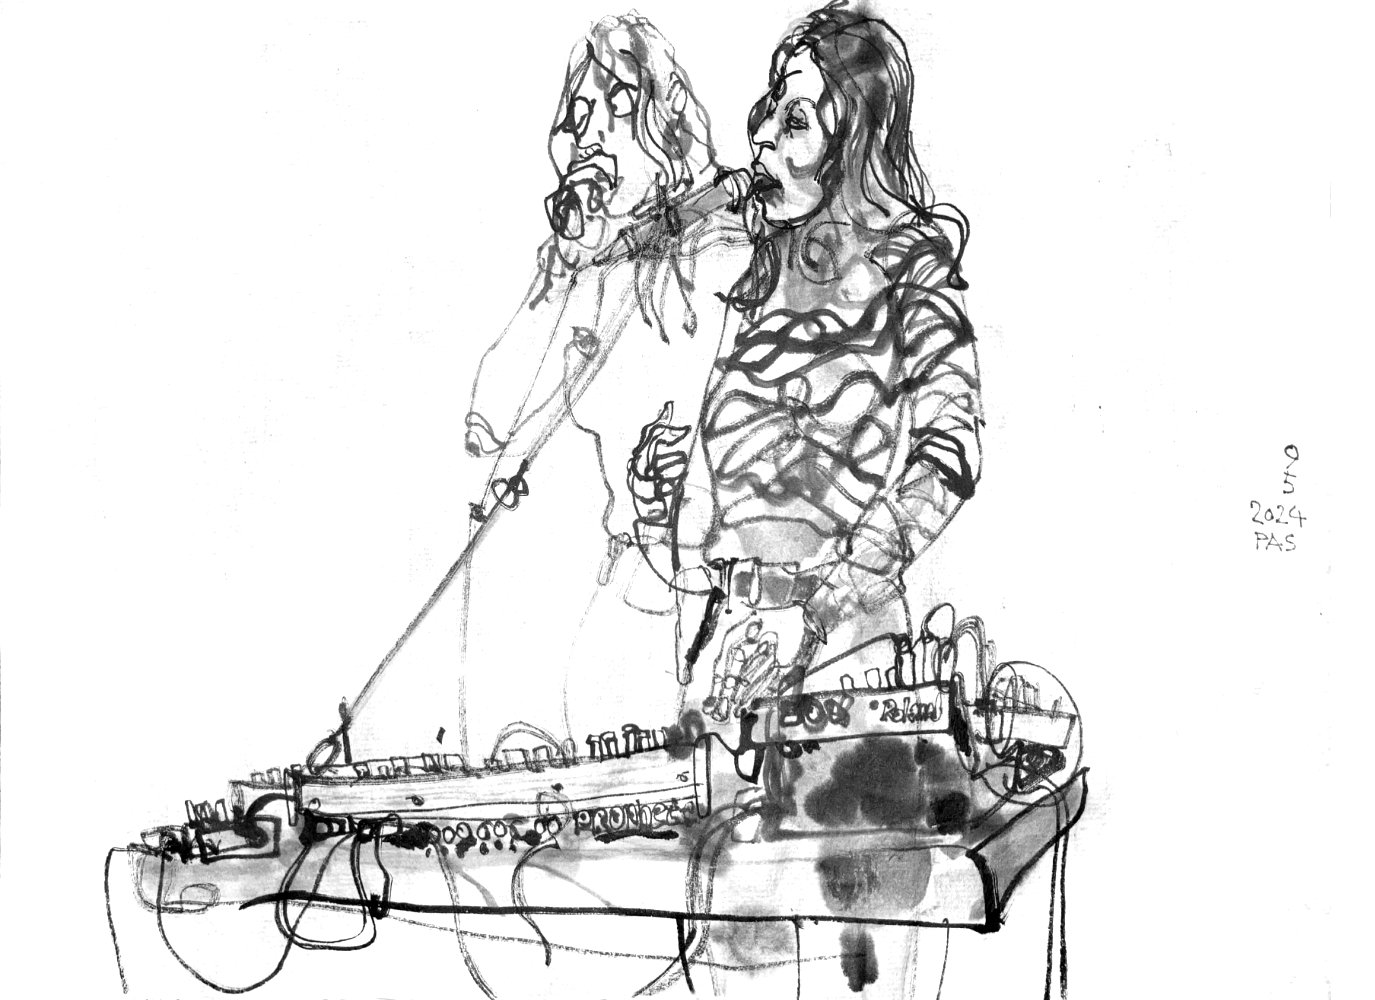 Ink drawing of a female singer, depicted twice, standing behind a desk with electronic devices.